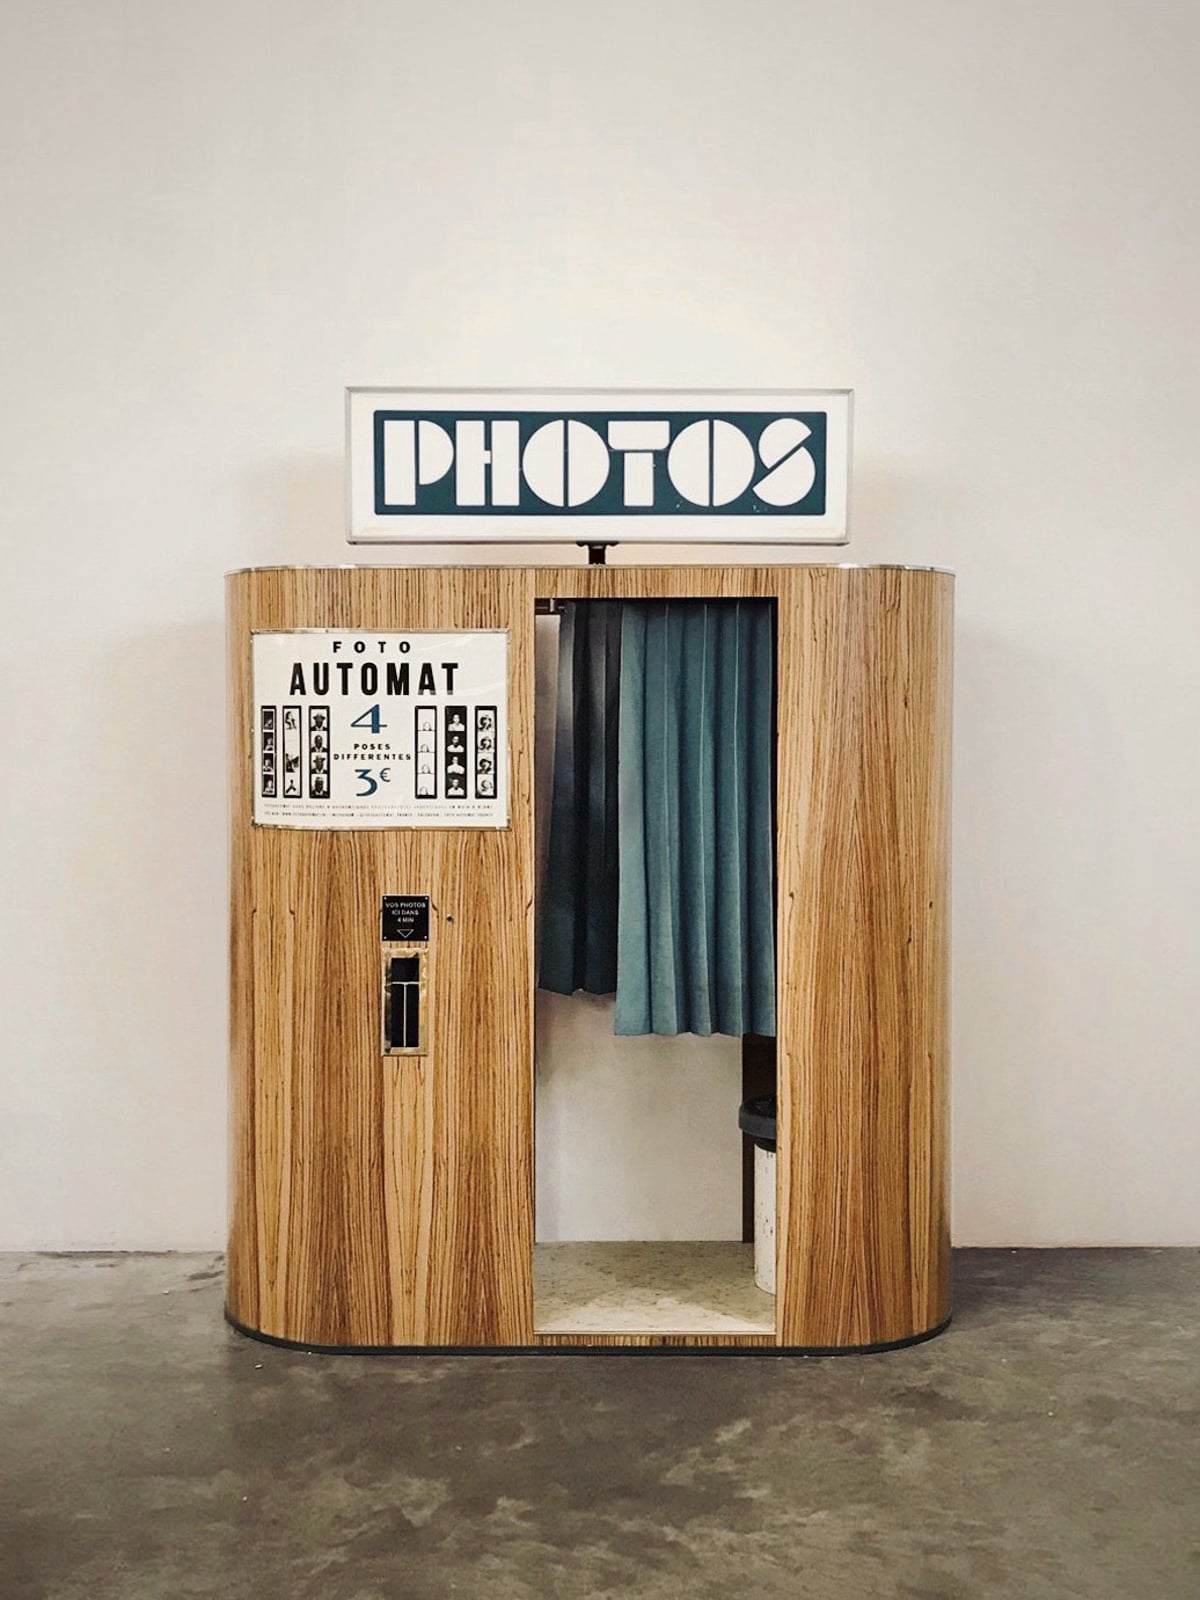 wooden photo booth with a lighted sign and a blue curtain